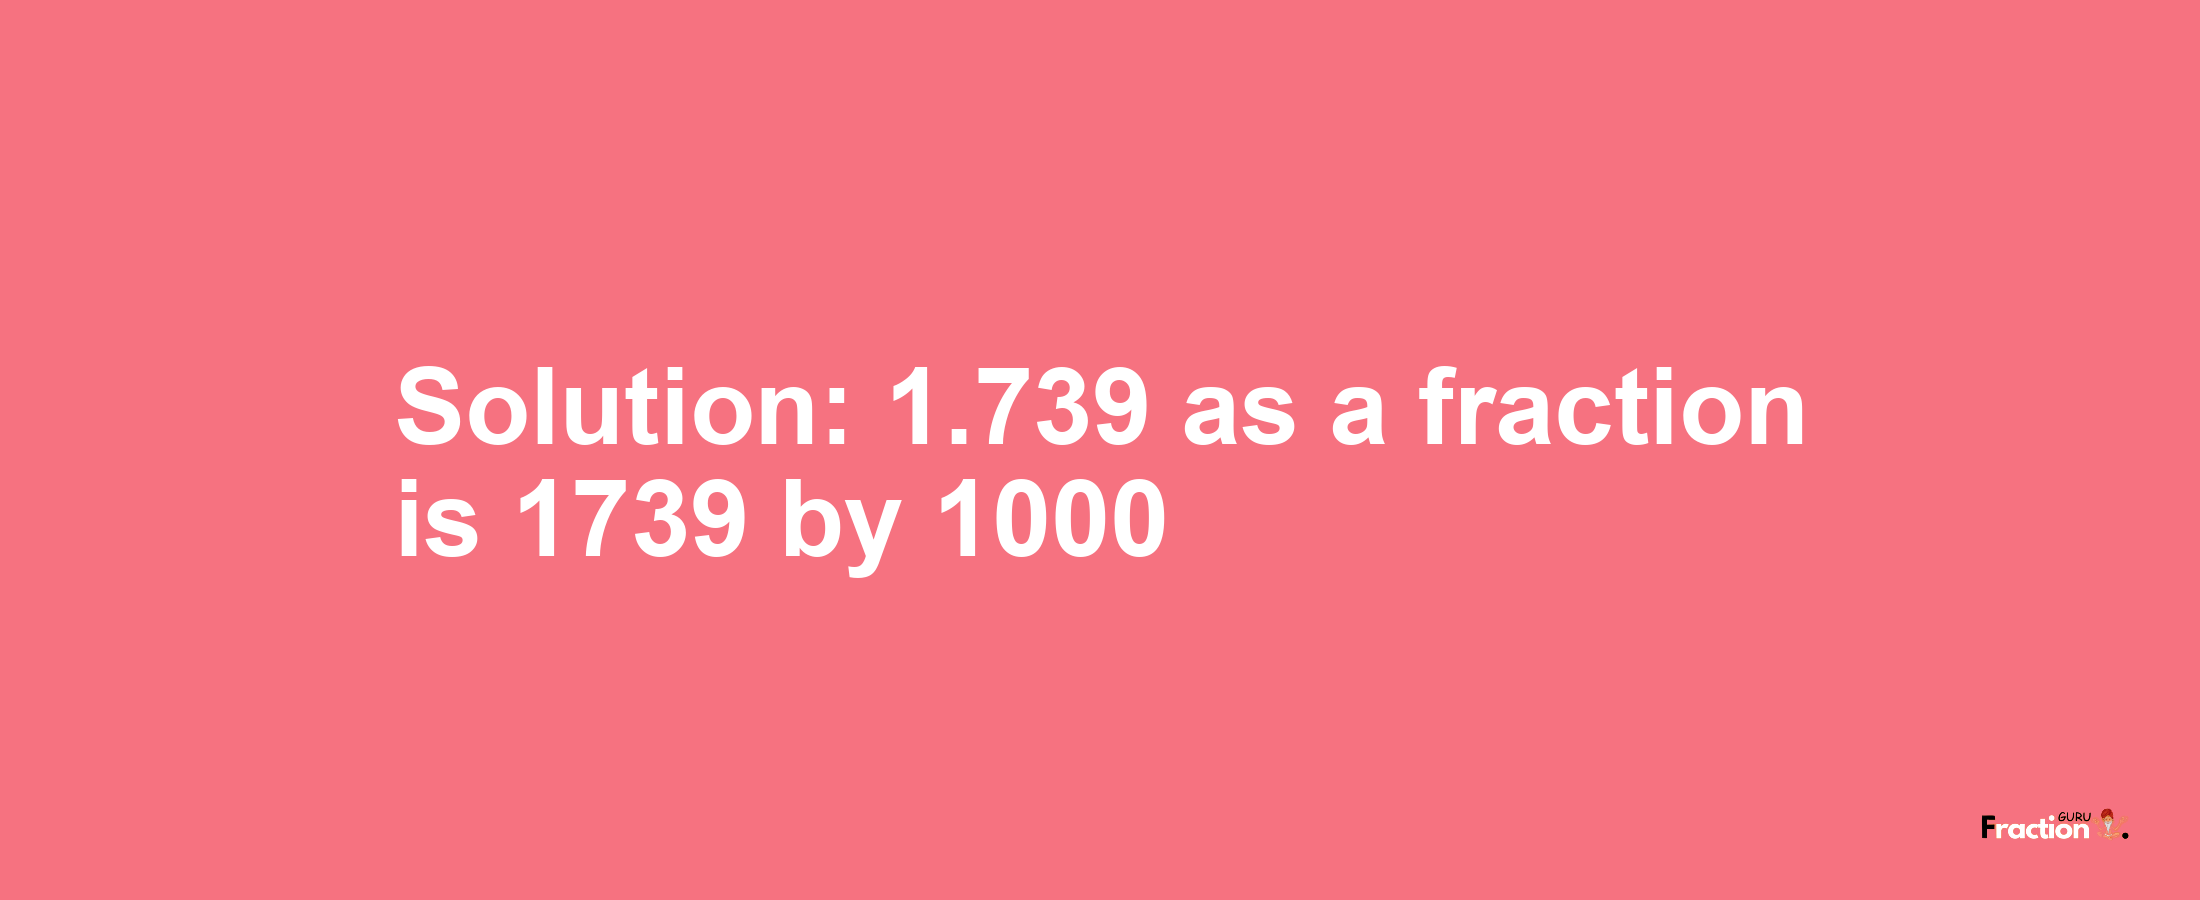 Solution:1.739 as a fraction is 1739/1000